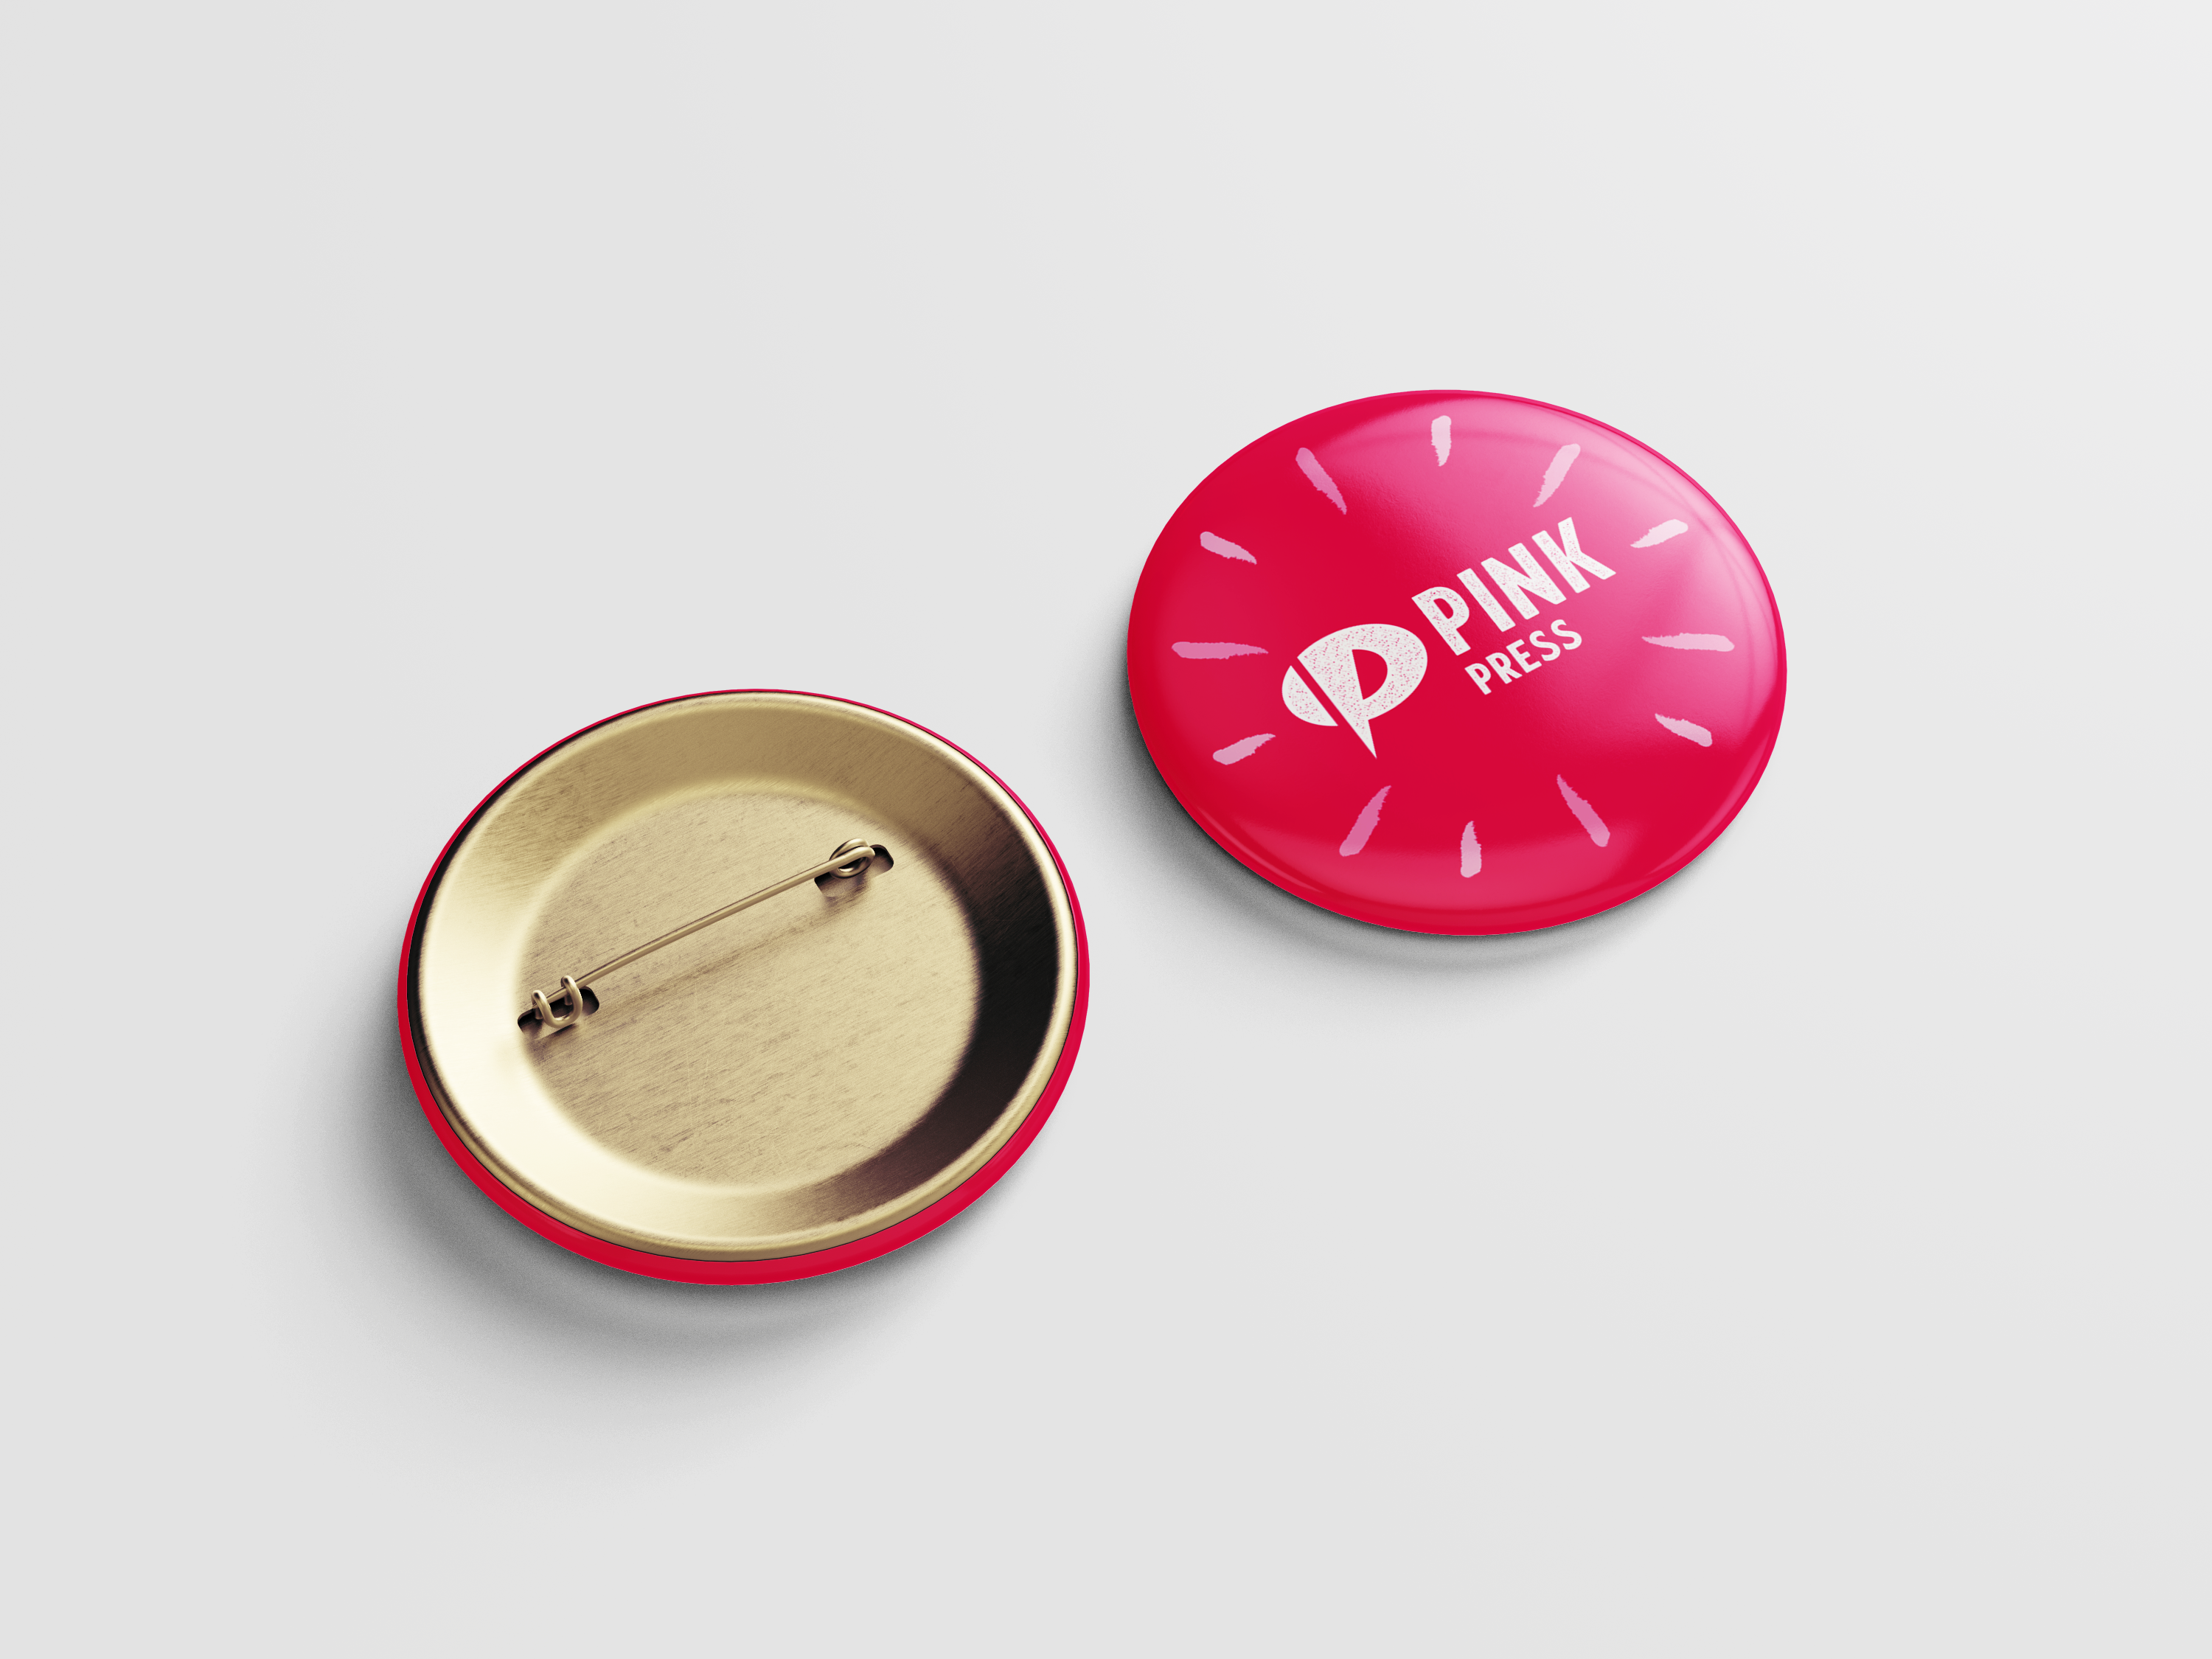 Pin-back buttons are a great incentive to get people involved in the zine-making process at an exhibition or workshop. Since buttons are wearable, they are also effective advertising that are inexpensive to produce.